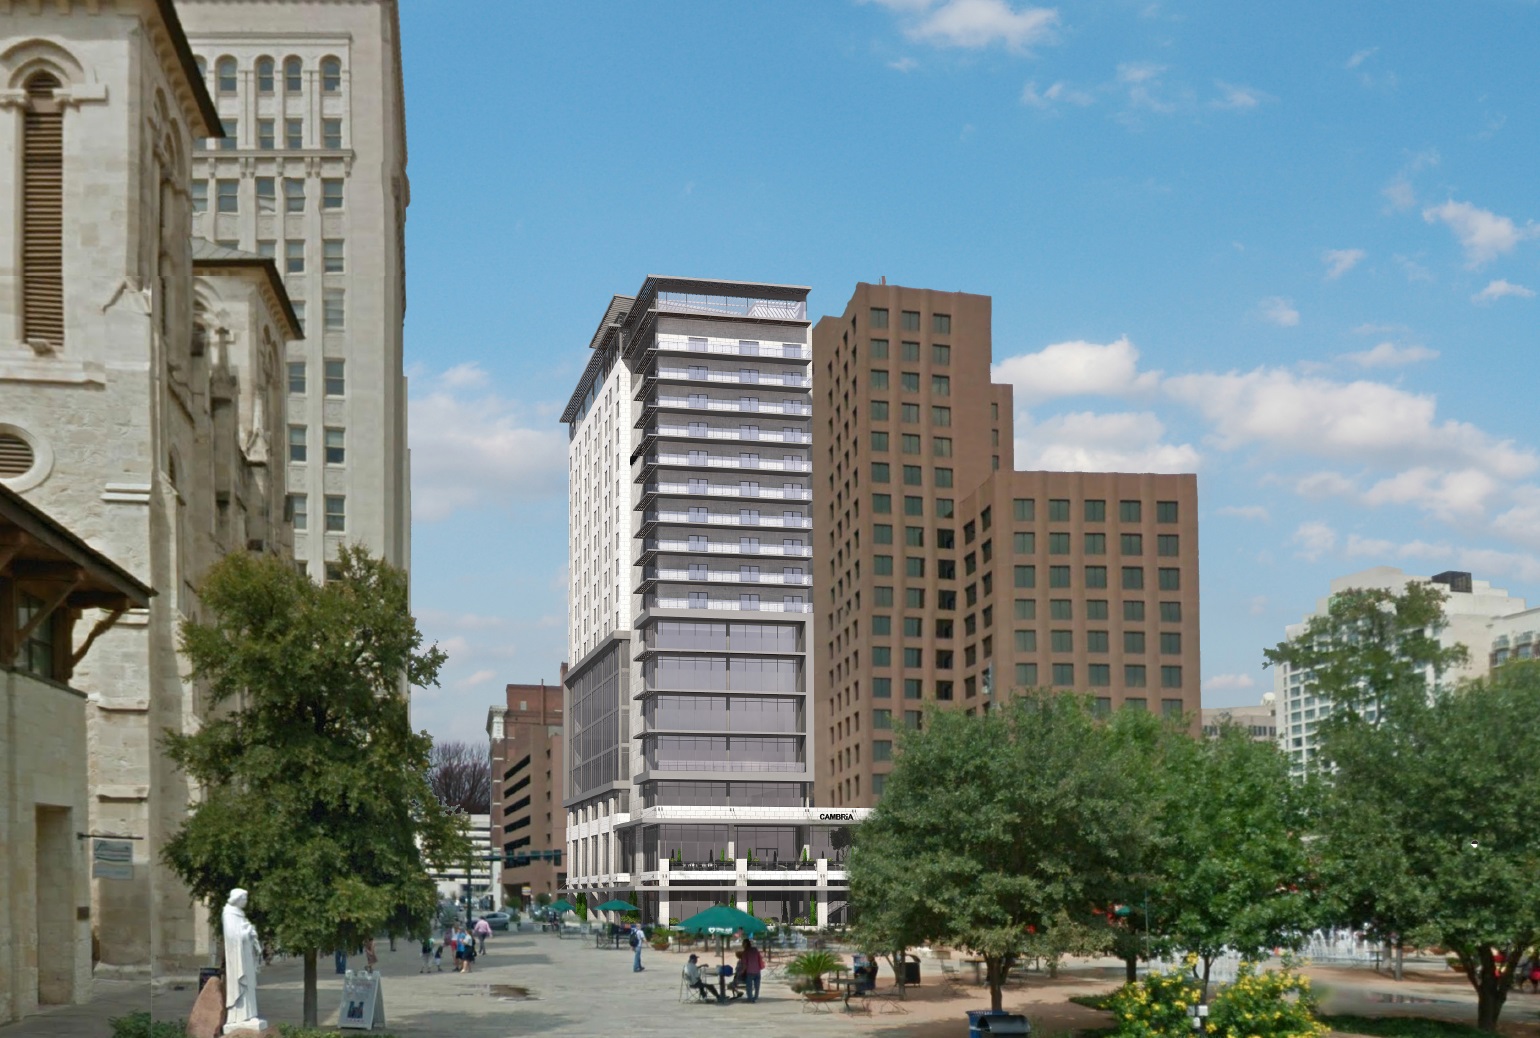 Hotel and office tower gets historic approval